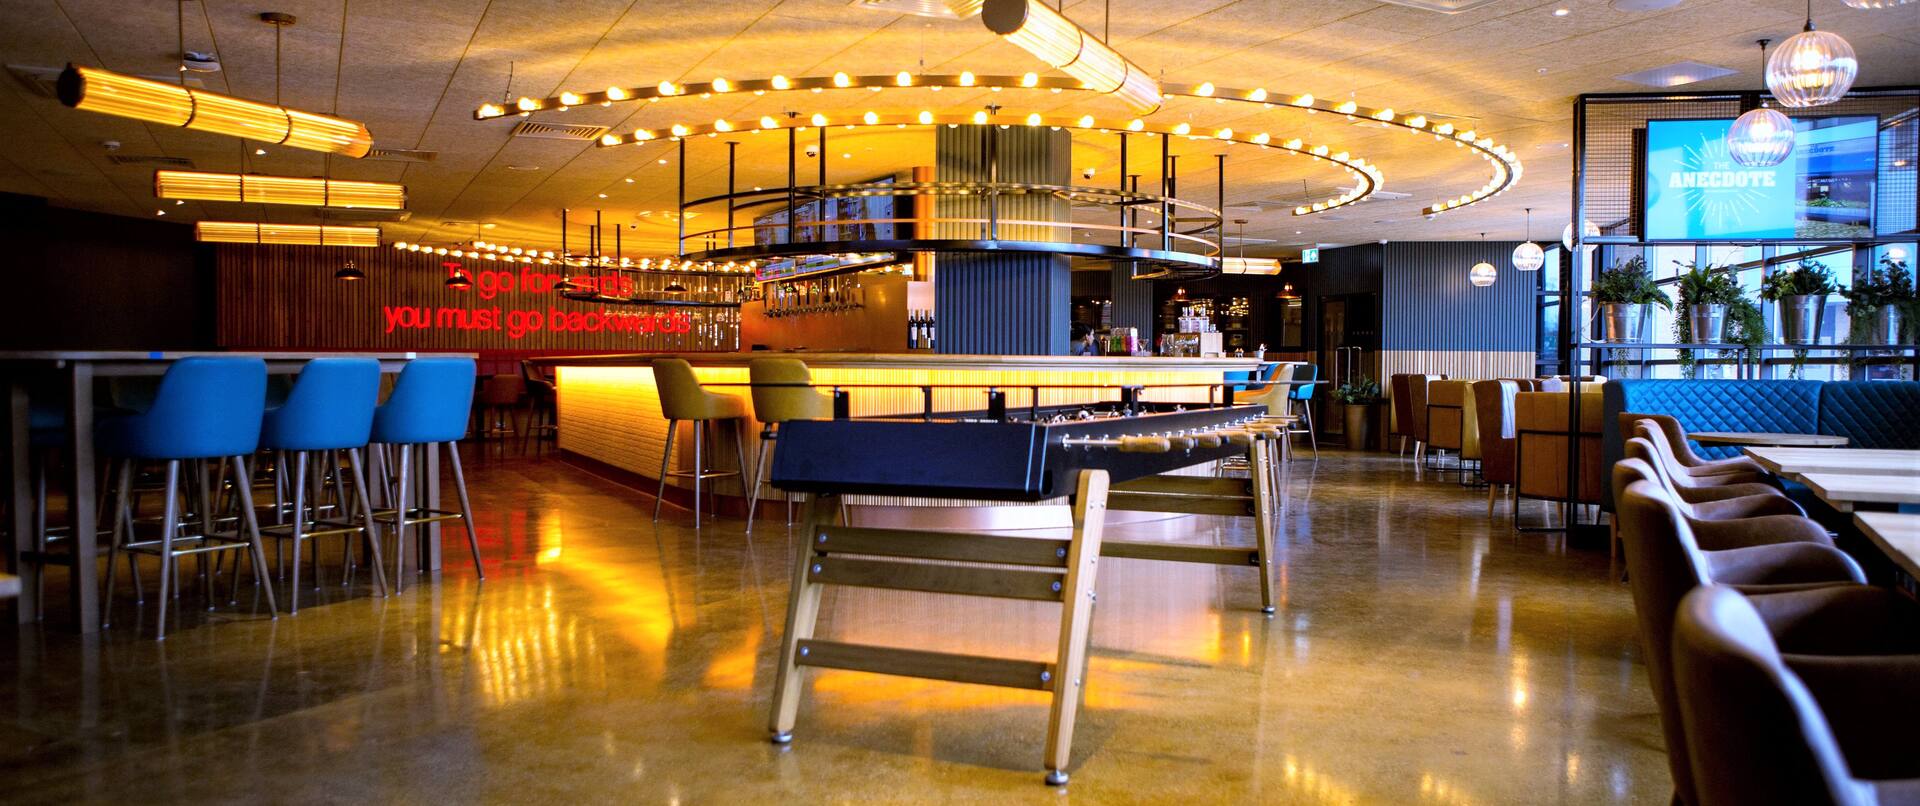 The Anecdote Bar with seating and table football